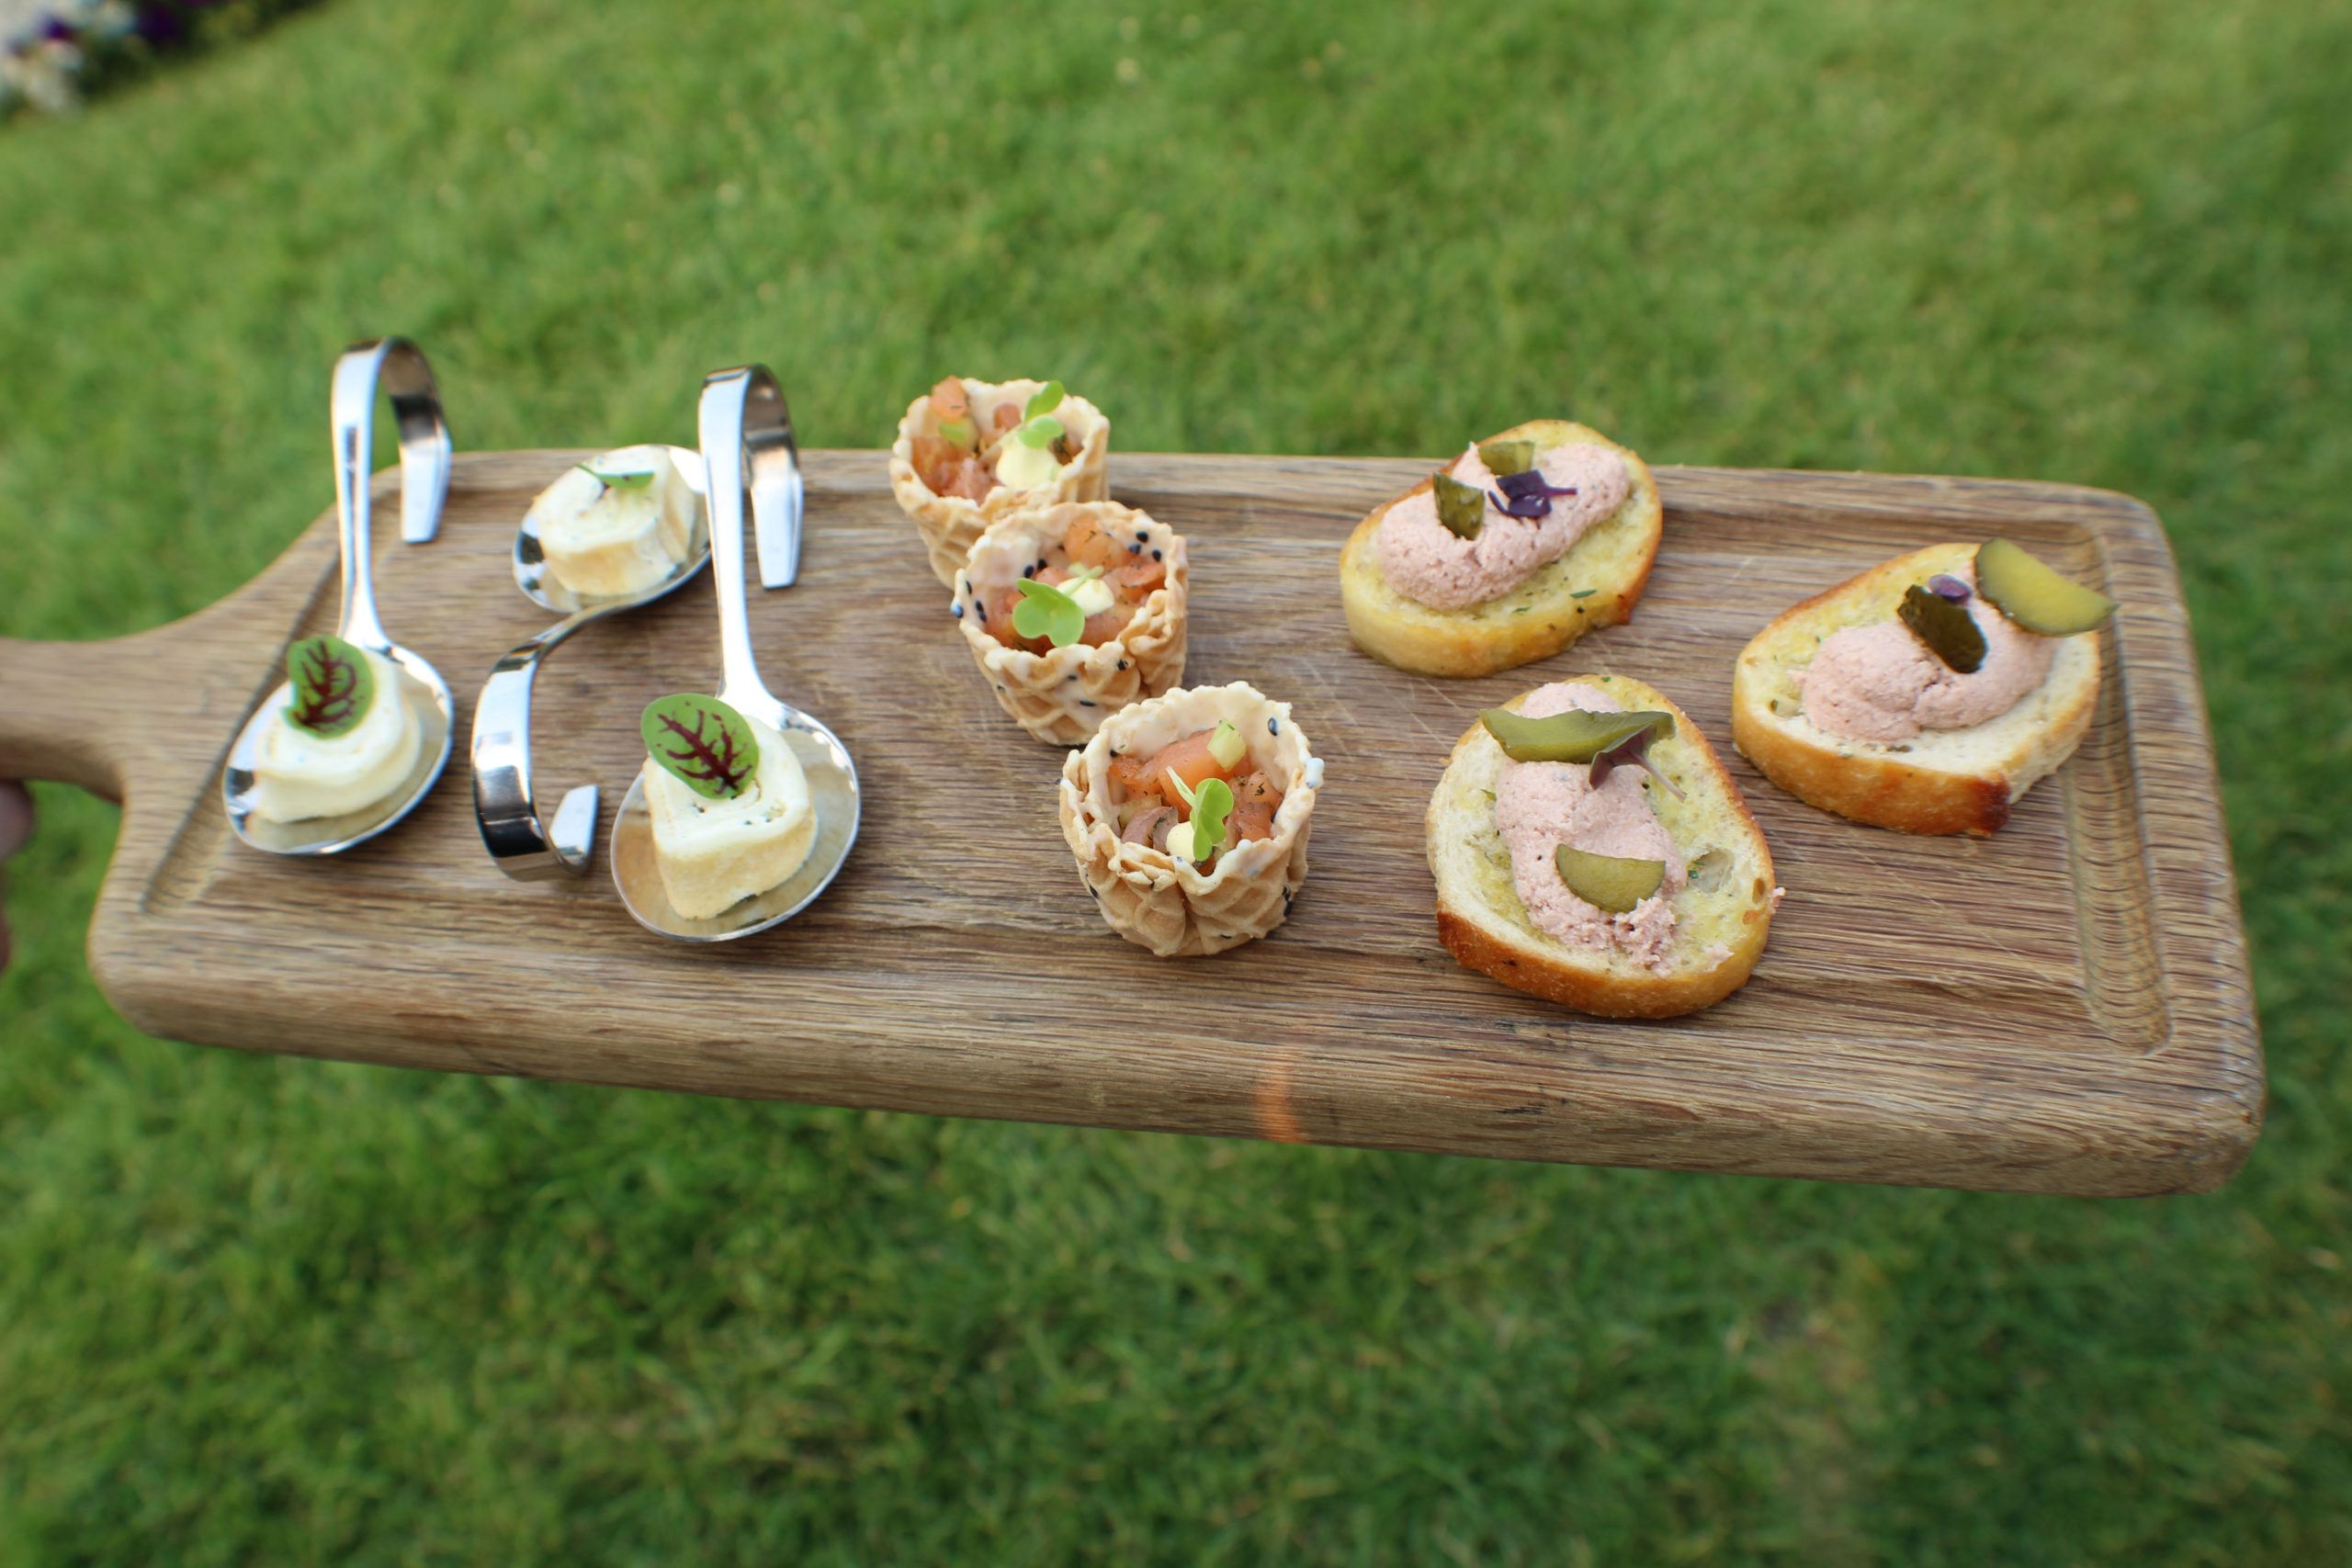 Food at the Prince House Lawn Dinner at Heritage Park in Calgary